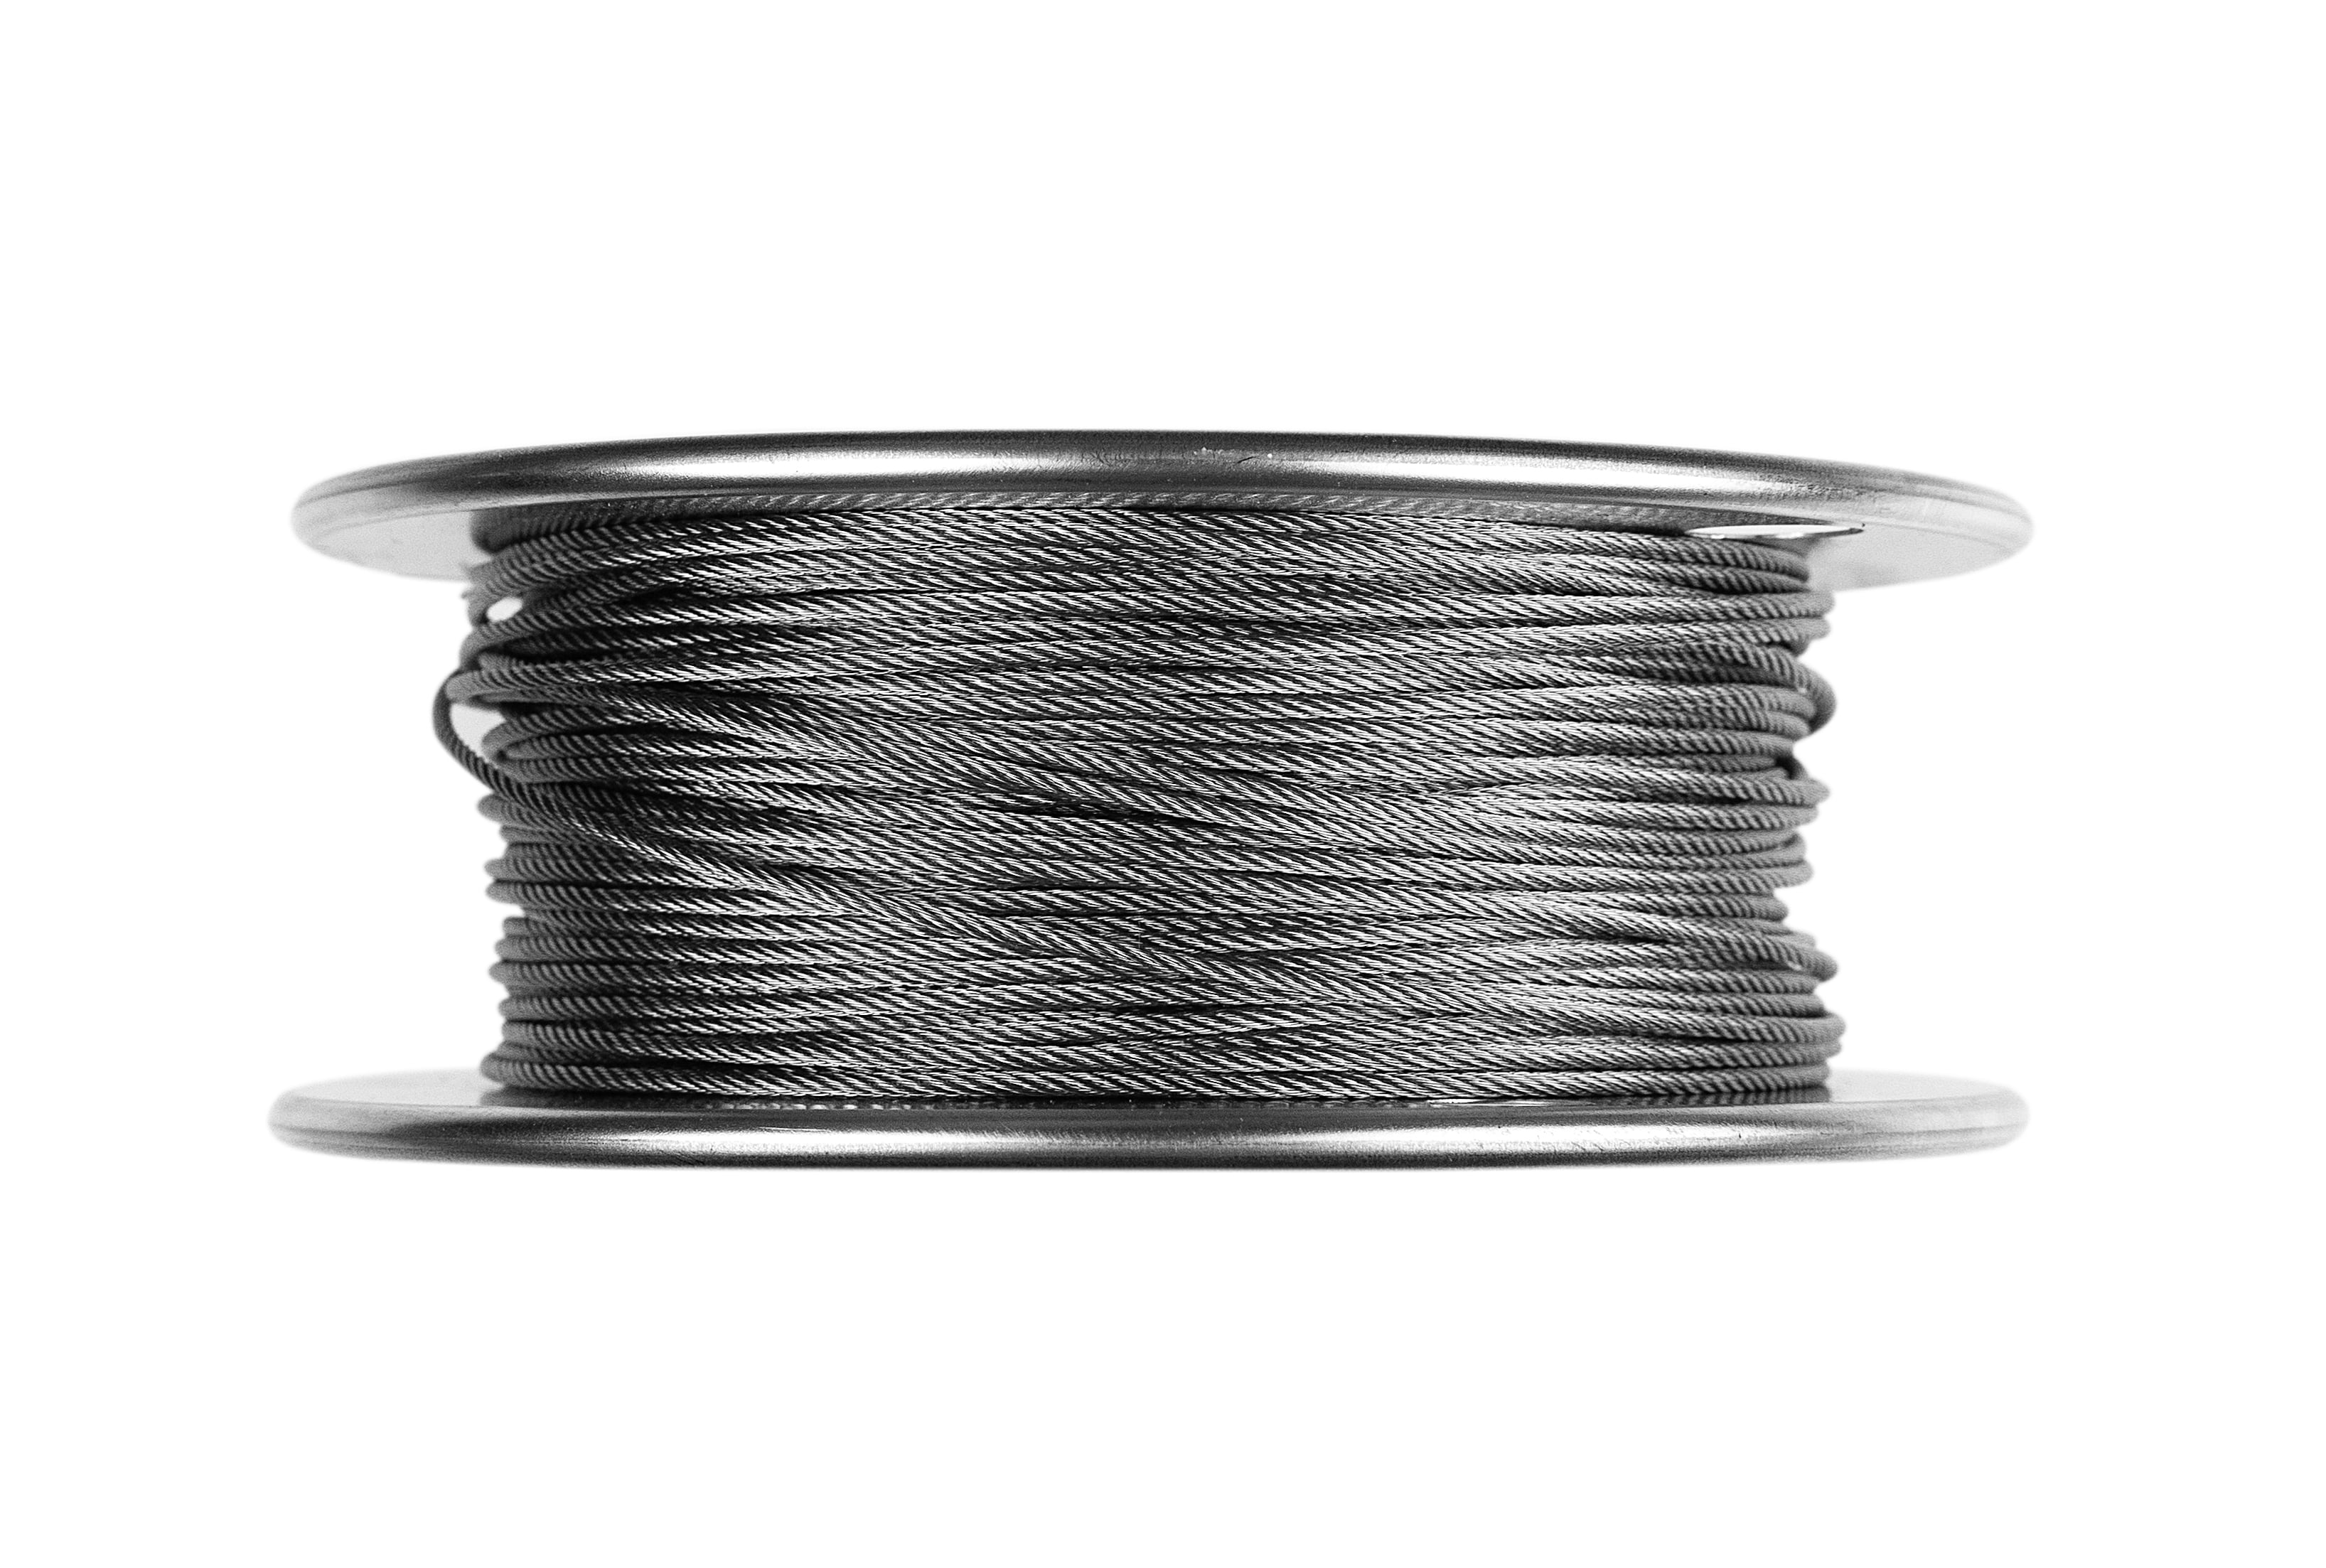 T304 Stainless Steel Cable Wire Rope,3/32",7x19,100ft Aircraft Rigging Petroleum 